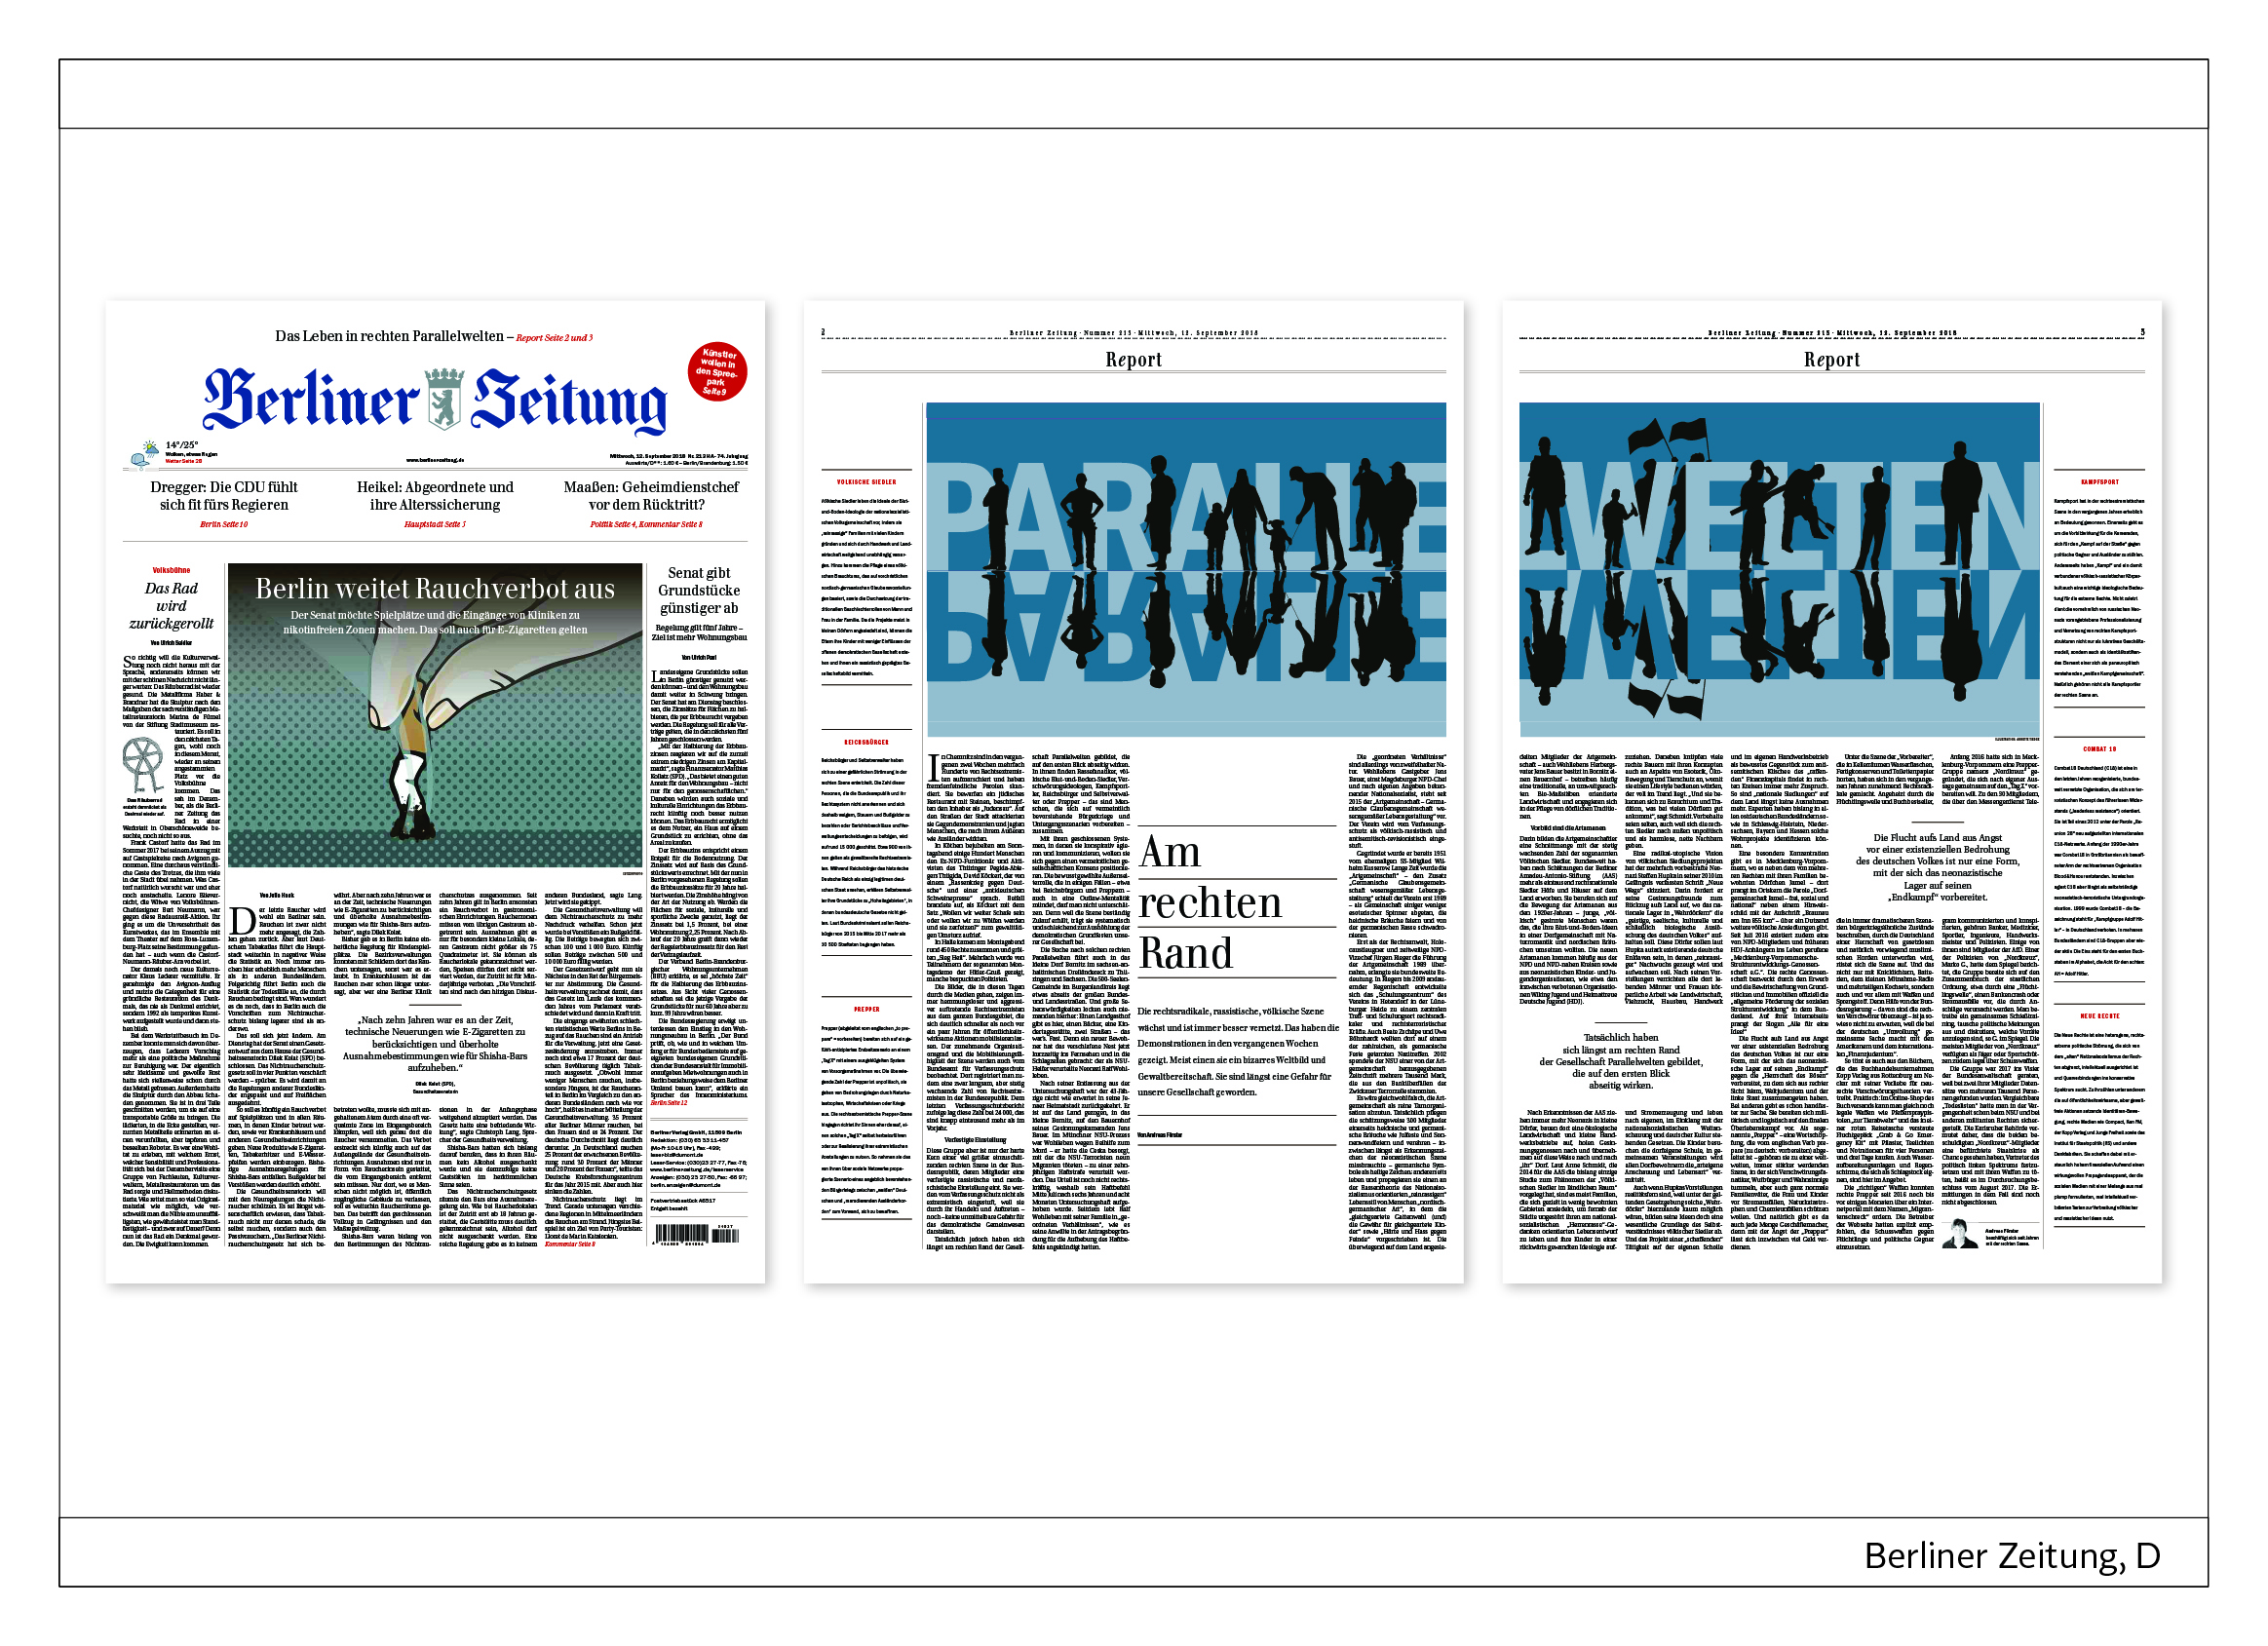 newspaper editorial page layout